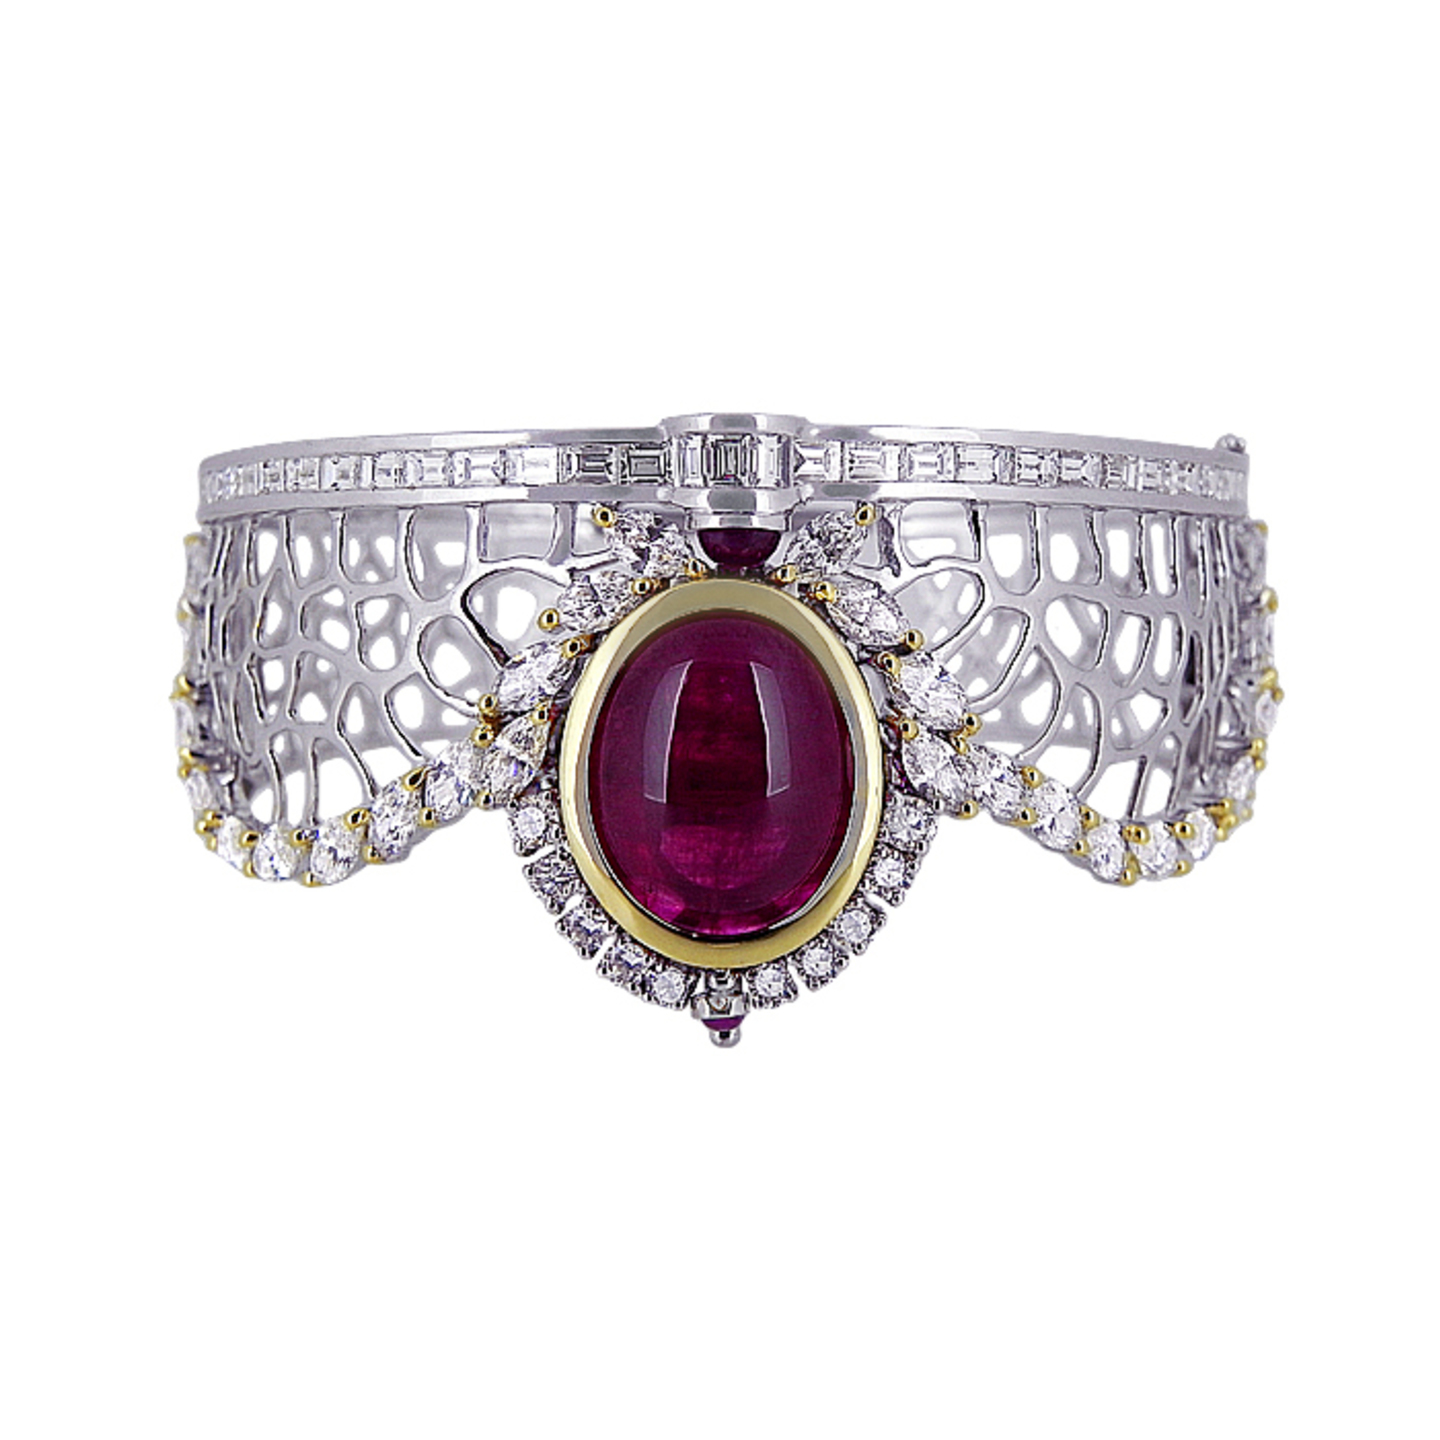 Broad Gold lattice work bracelets adorned with striking centre gem surrounded with diamonds